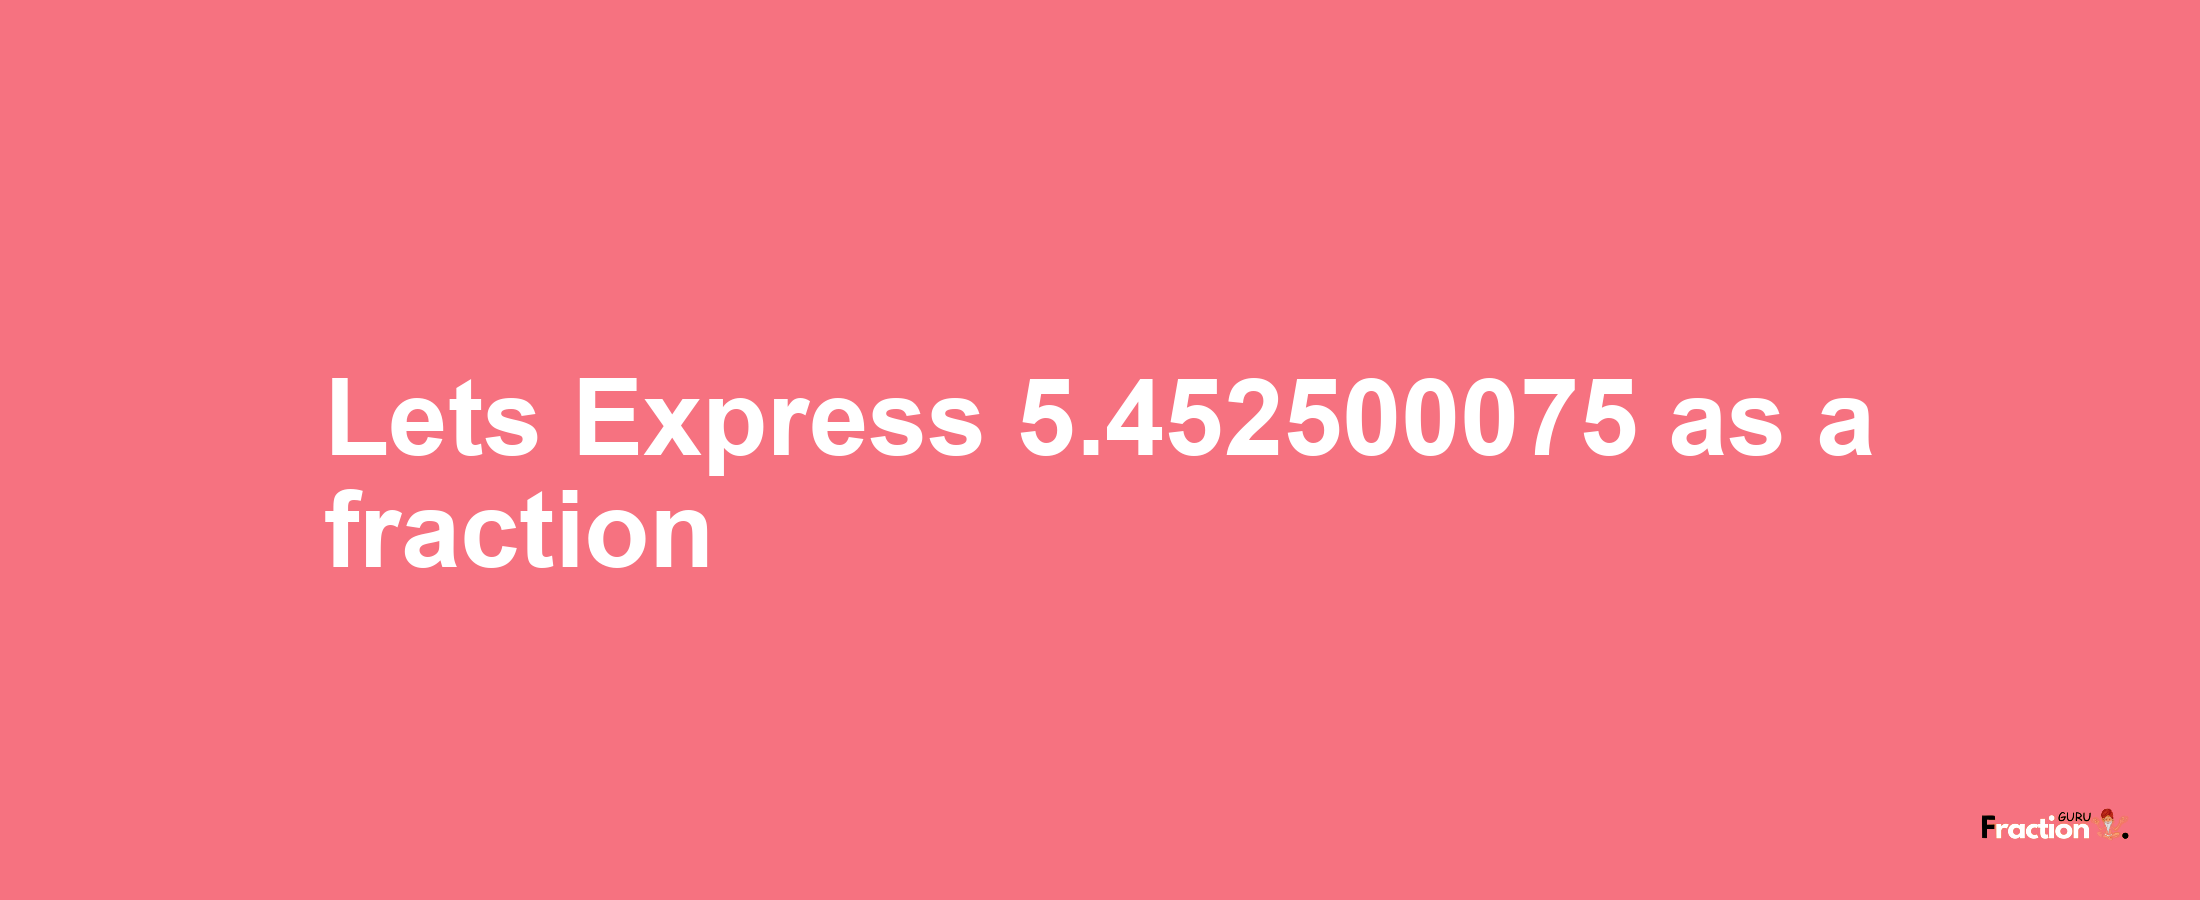 Lets Express 5.452500075 as afraction